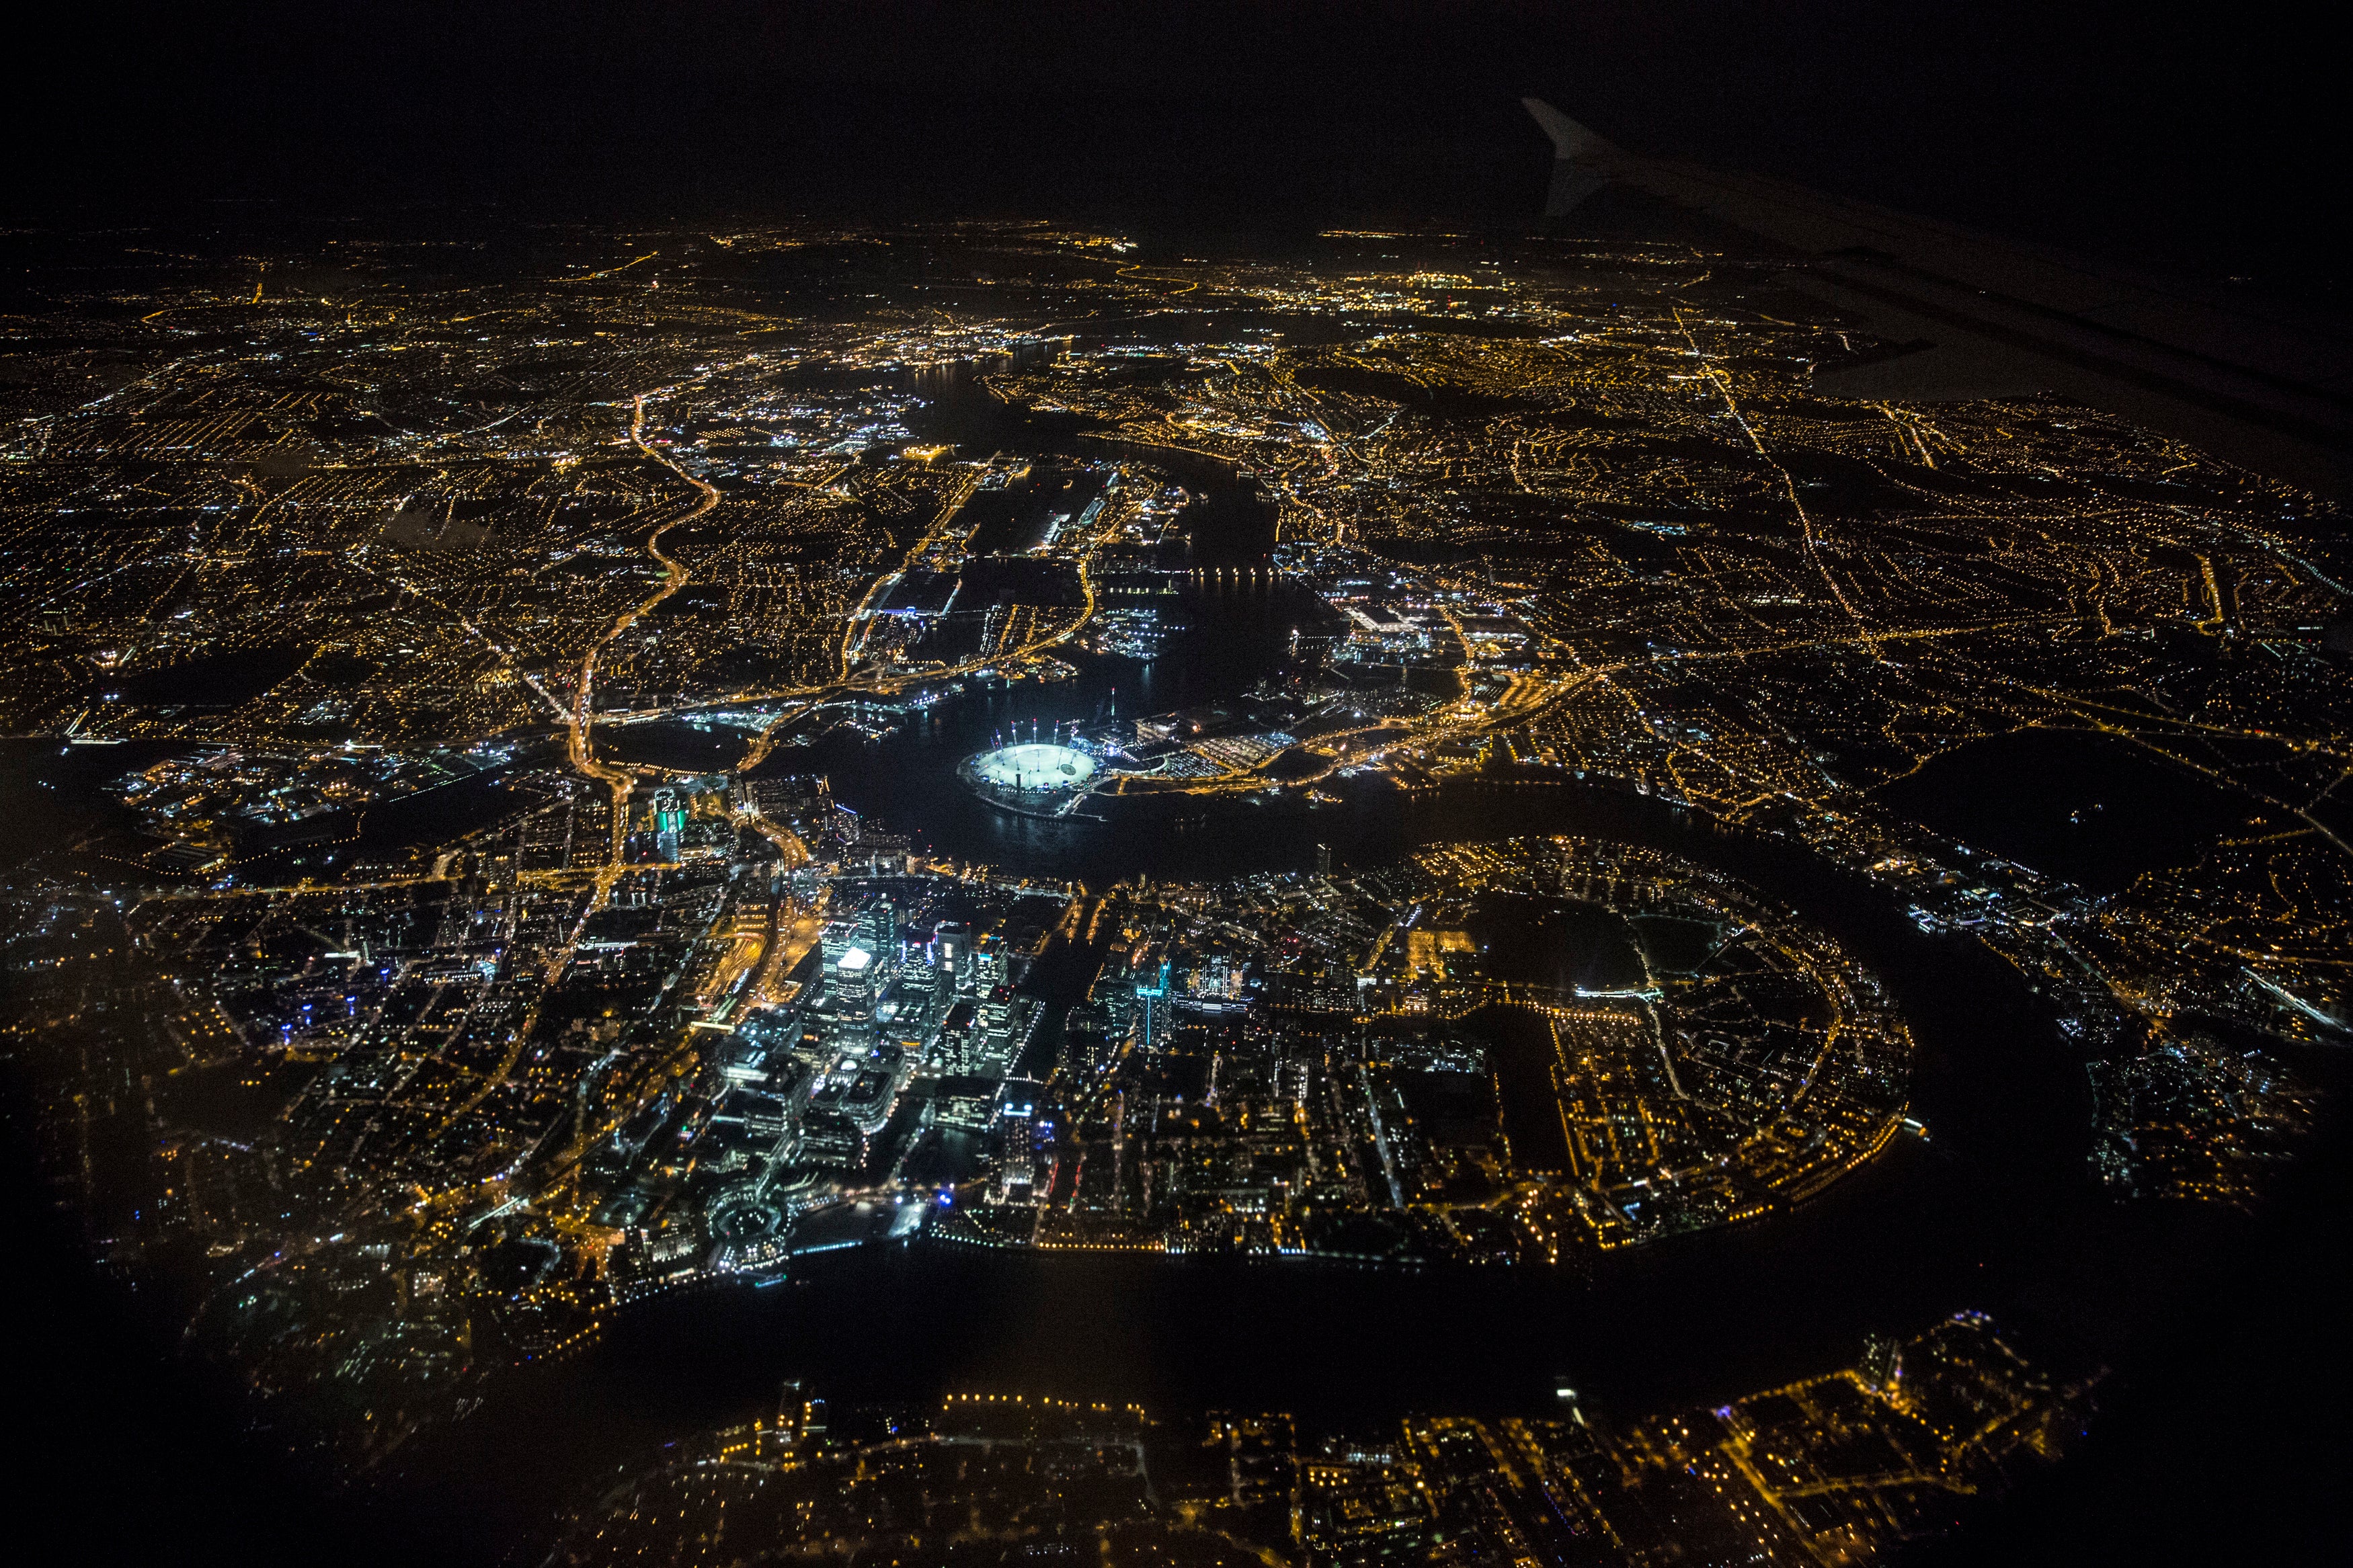 London at night...note the artificial lighting. (Photo: Oli Scarff, Getty Images)